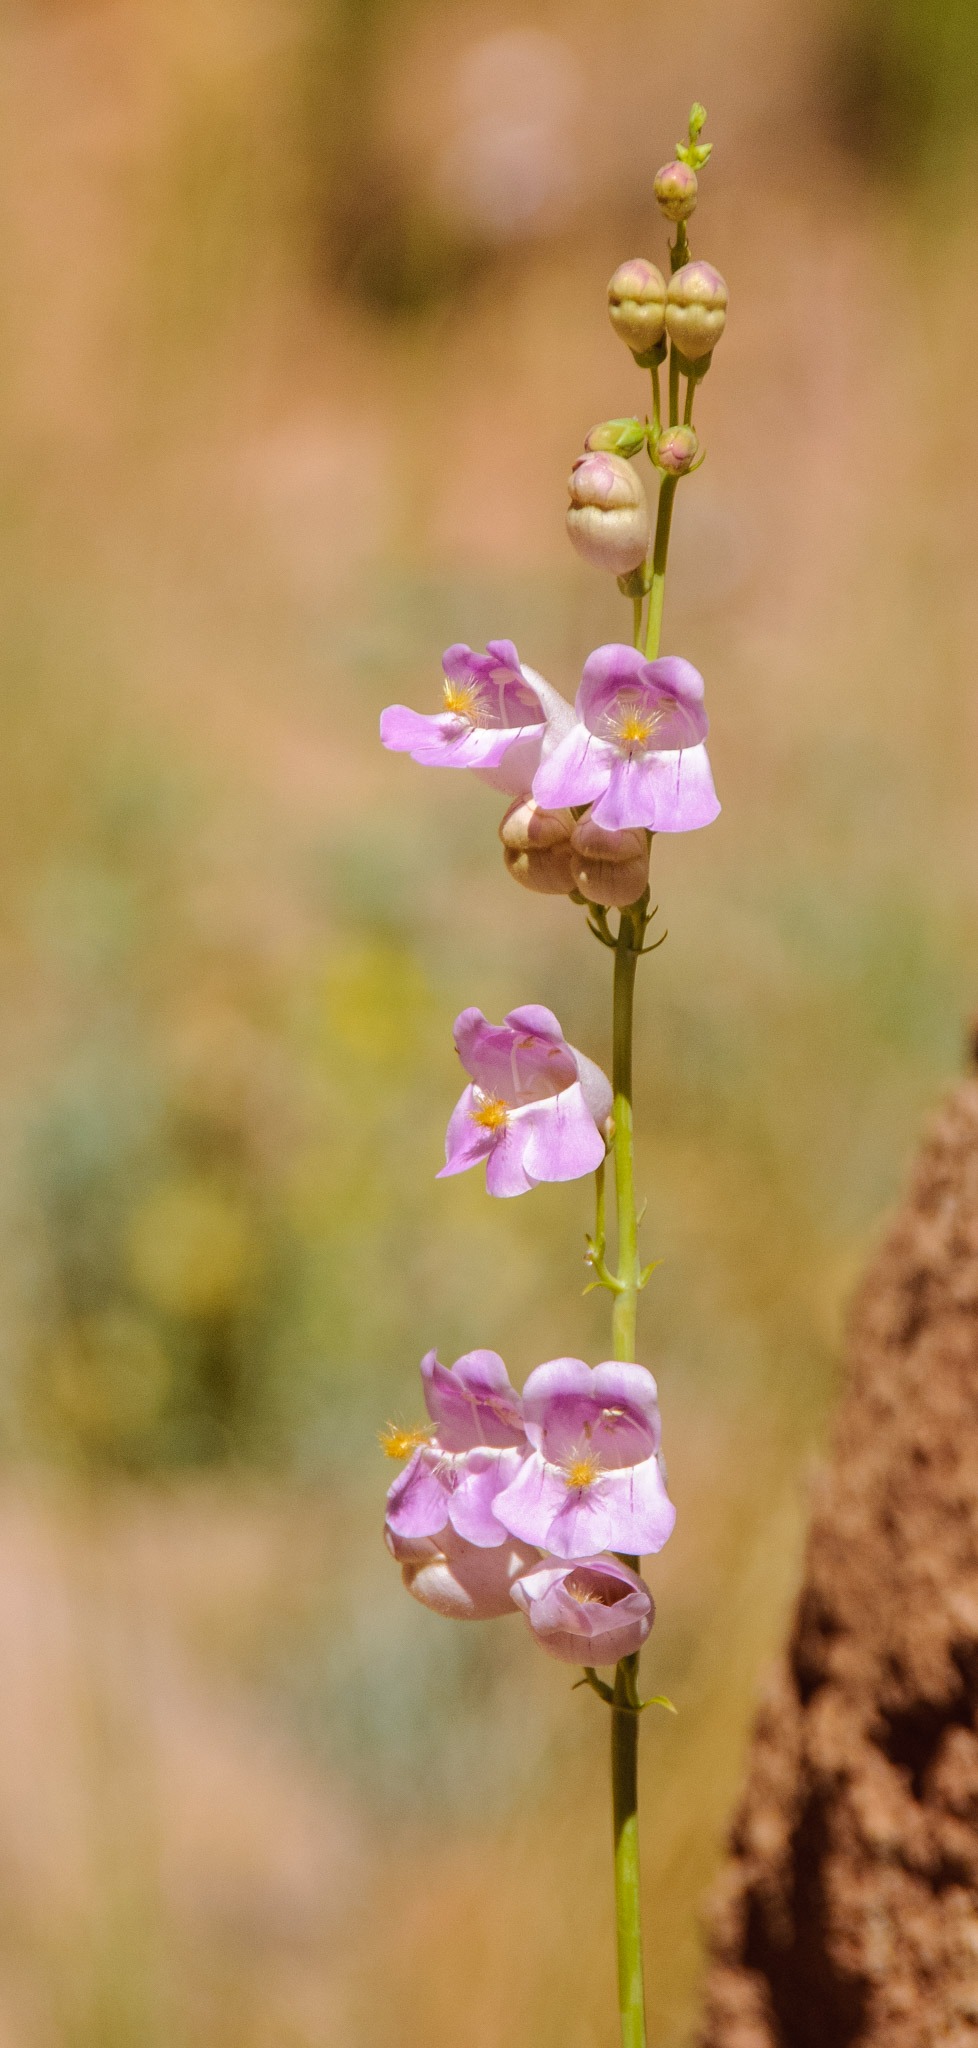 This lovely pink toadflax, or Linaria Vulgaris, grows along the Capitol Gorge Trail in Capitol Reef National Park, Utah.